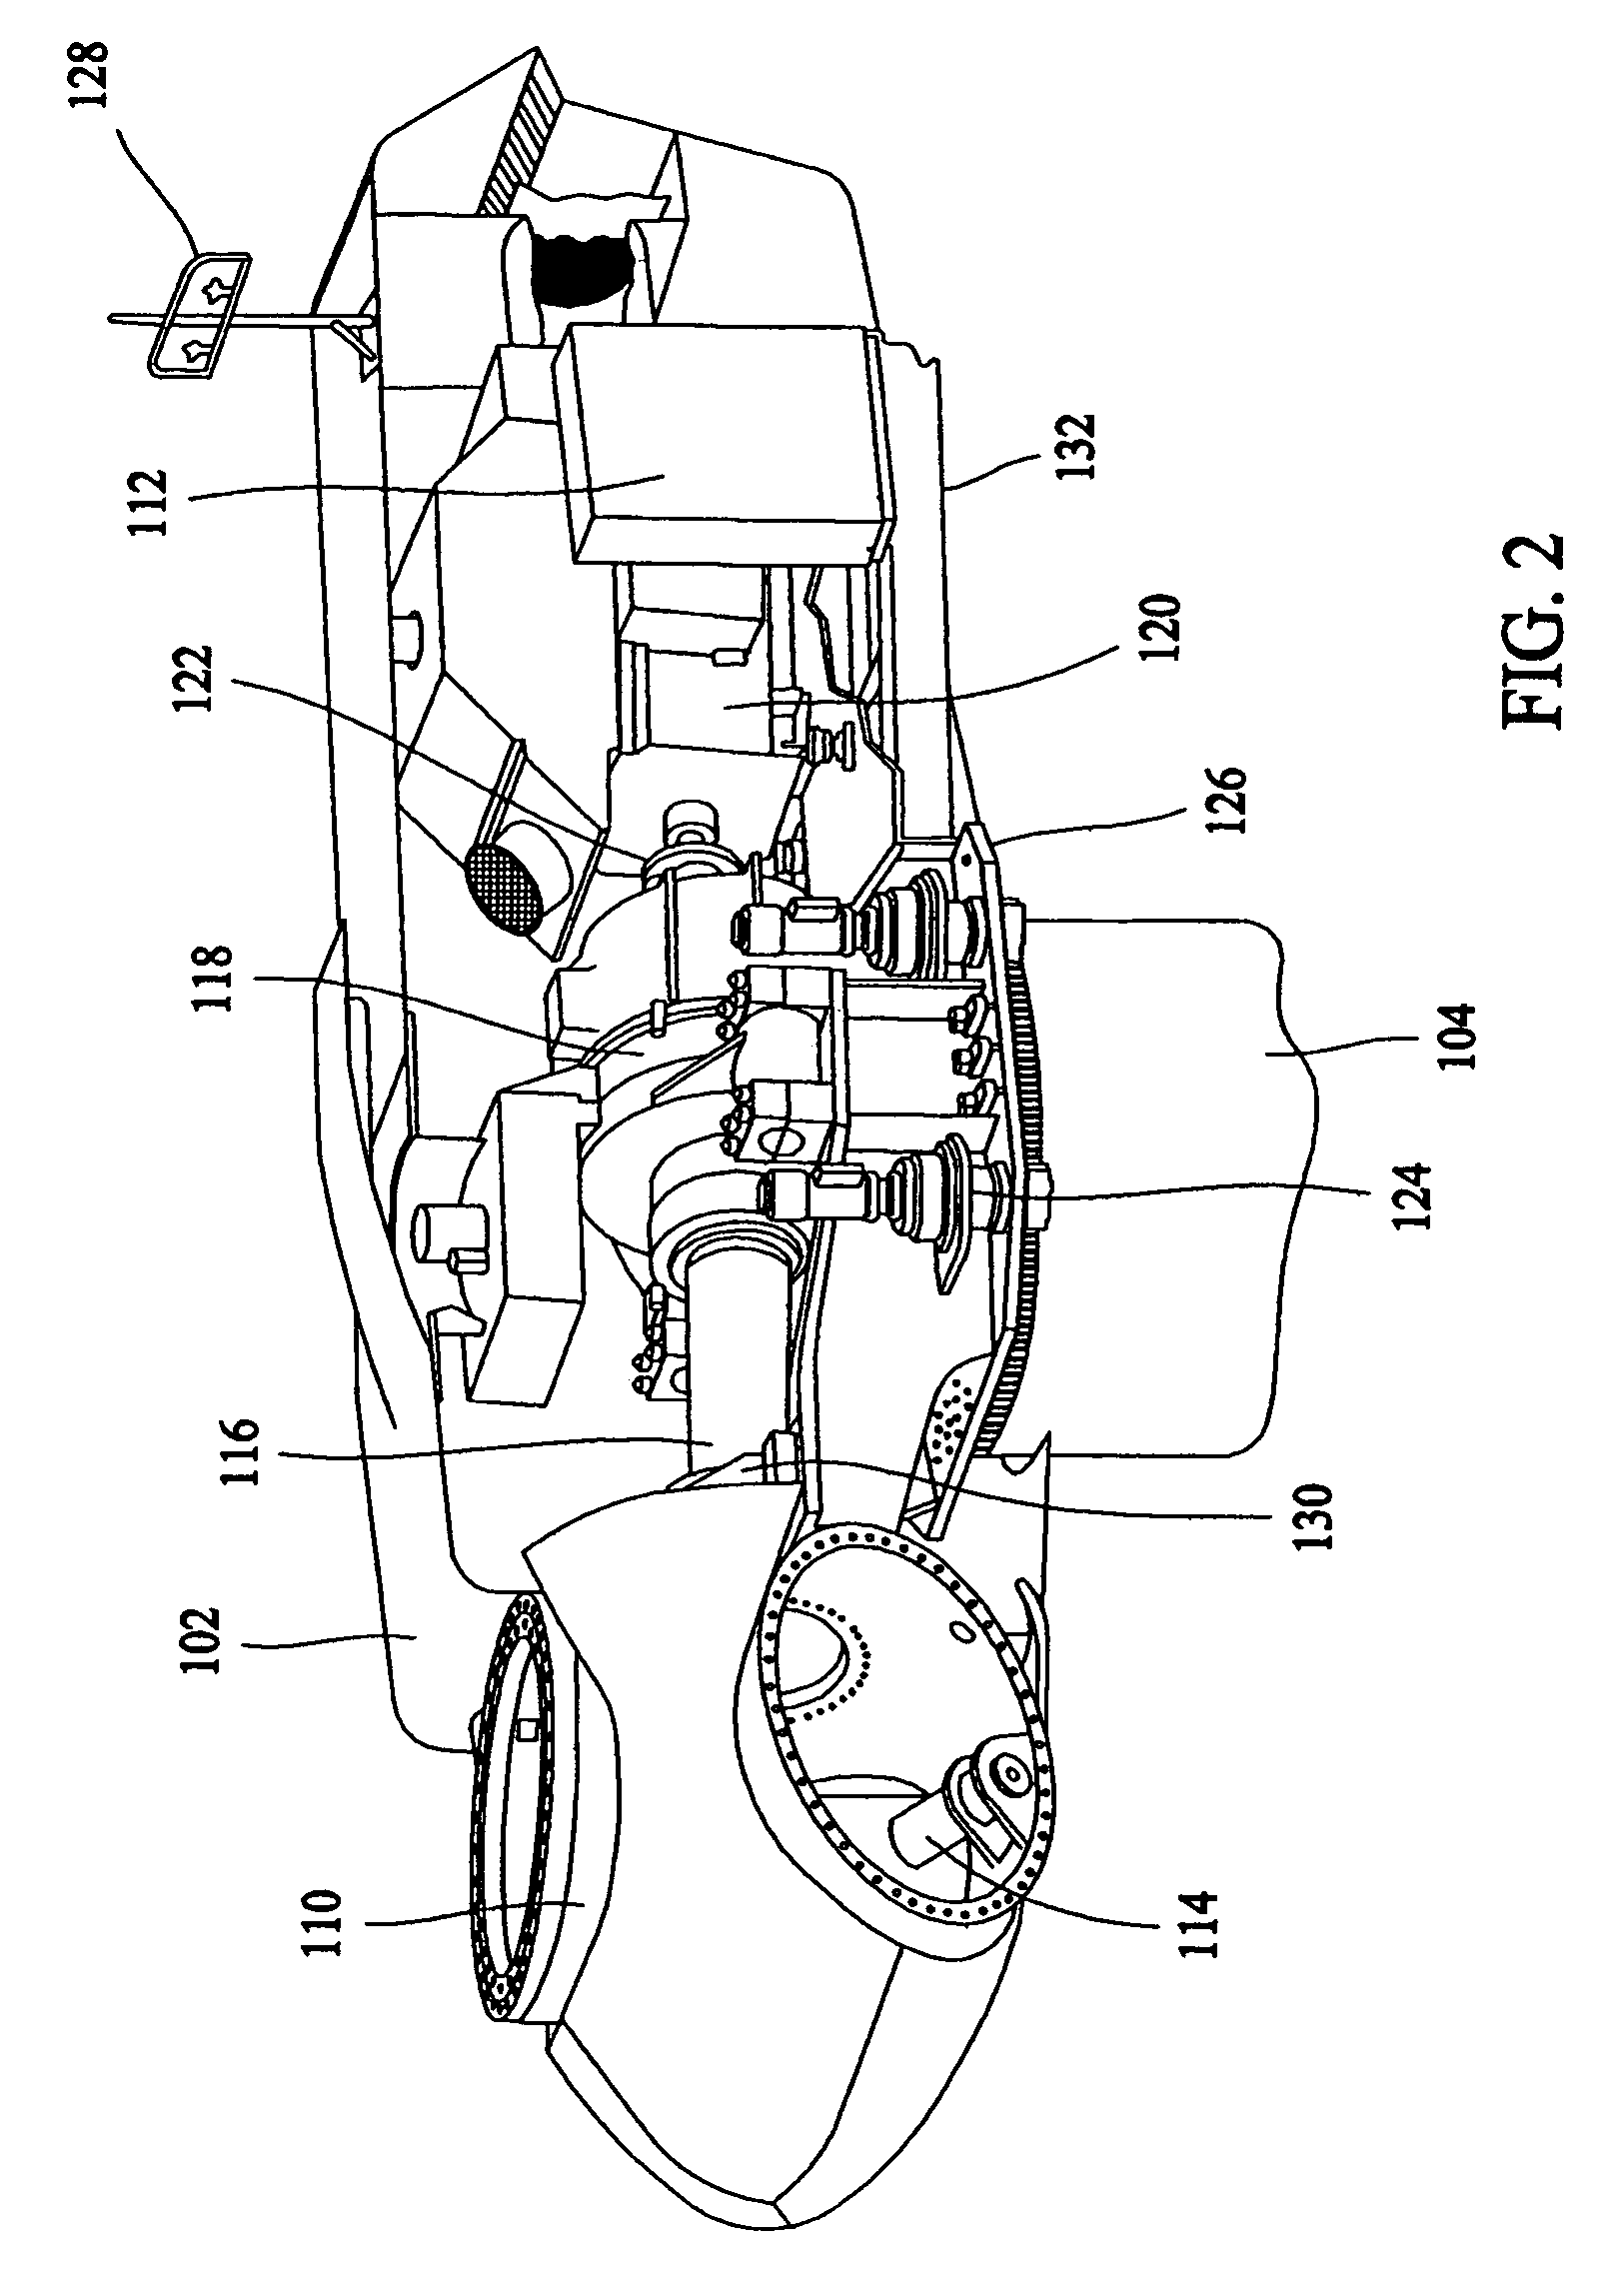 Methods and apparatus for twist bend coupled (TCB) wind turbine blades